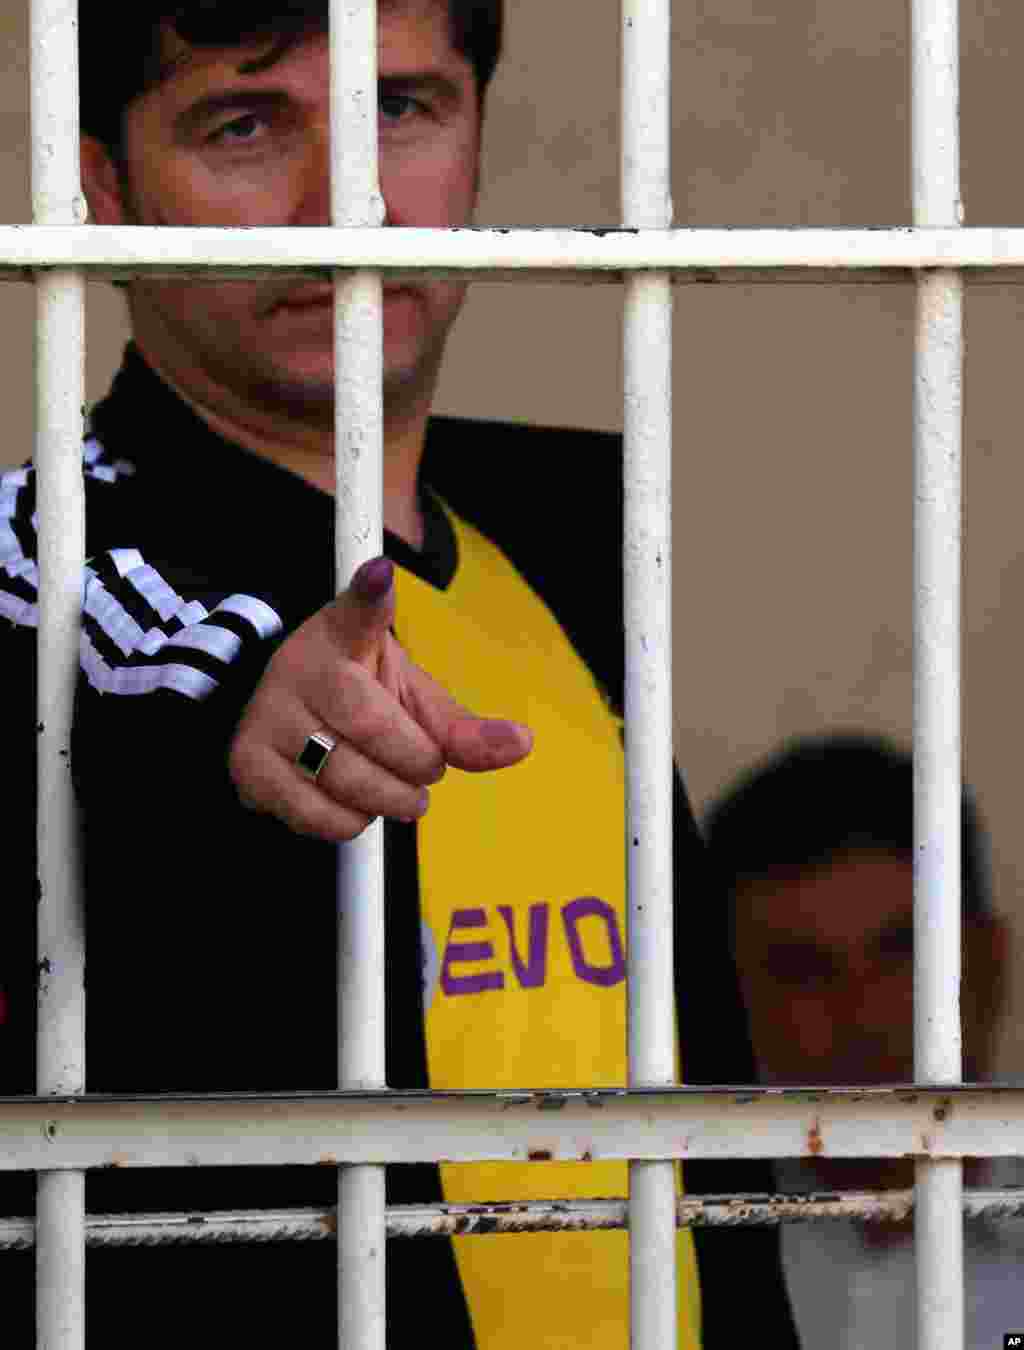 A detainee shows his inked finger after casting a vote at the polling center inside a prison in Irbil, April 28, 2014.